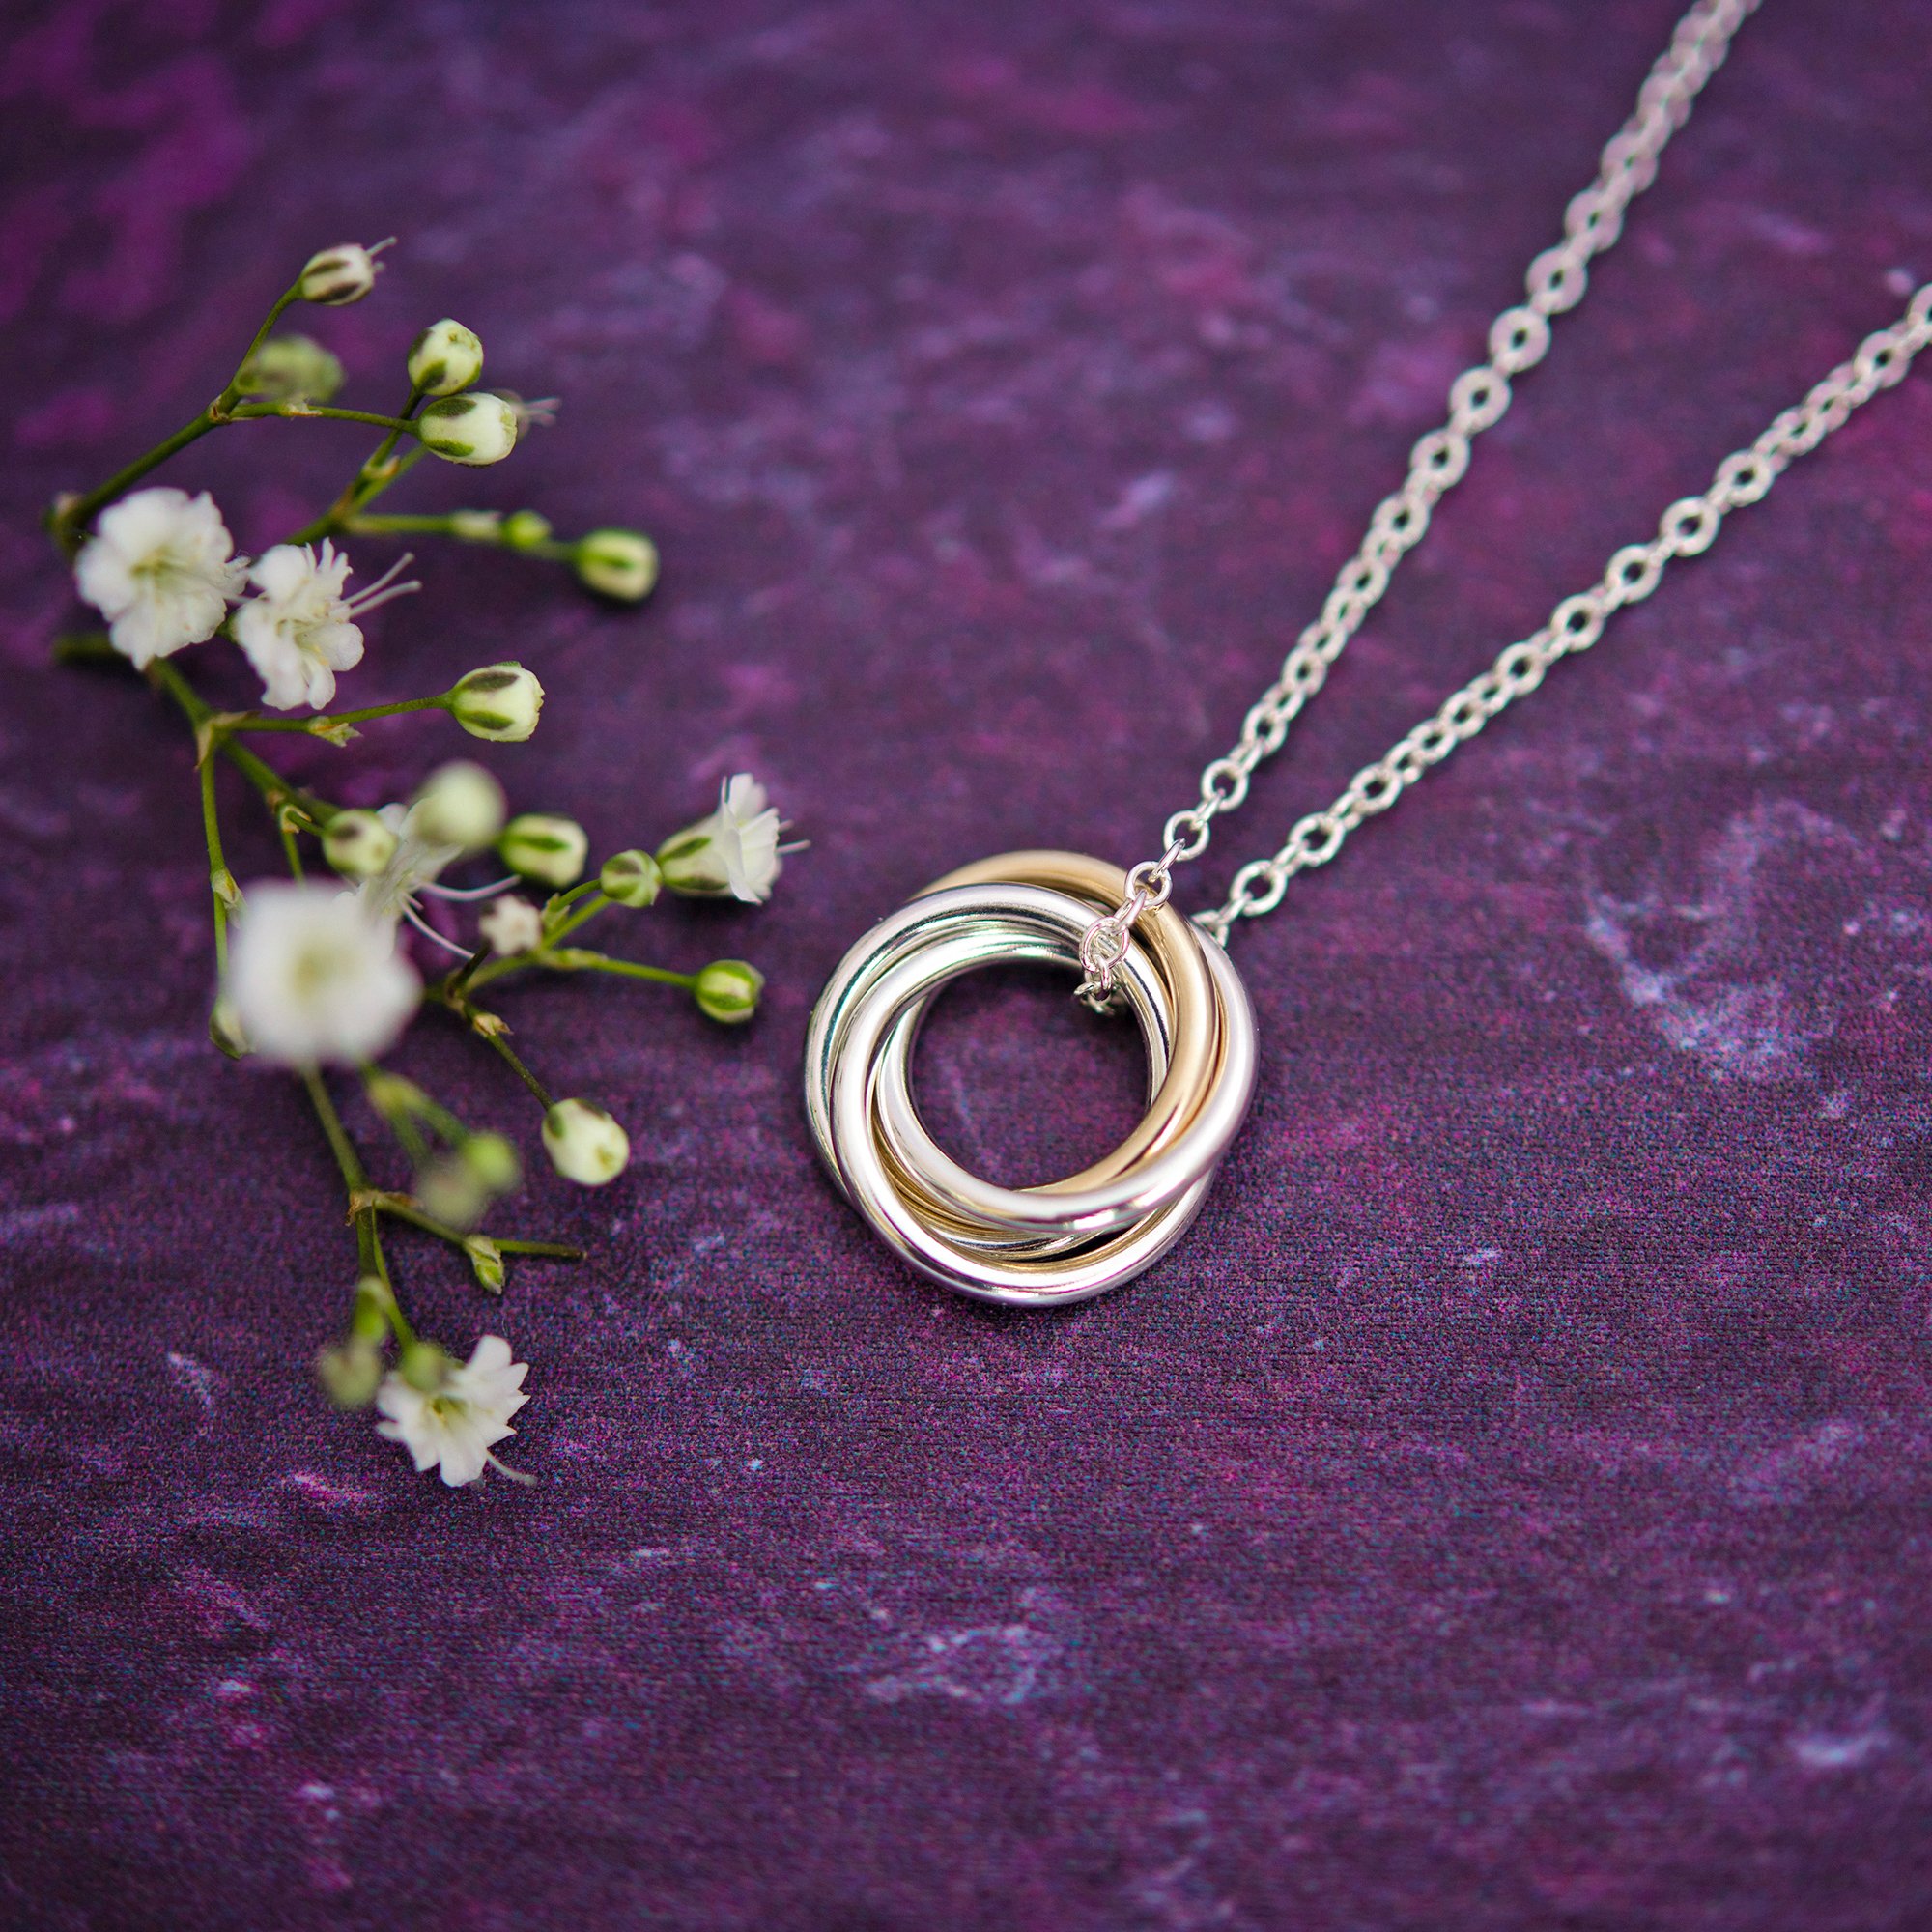 Wedding Ring On A Necklace 2024 | citybeef.com